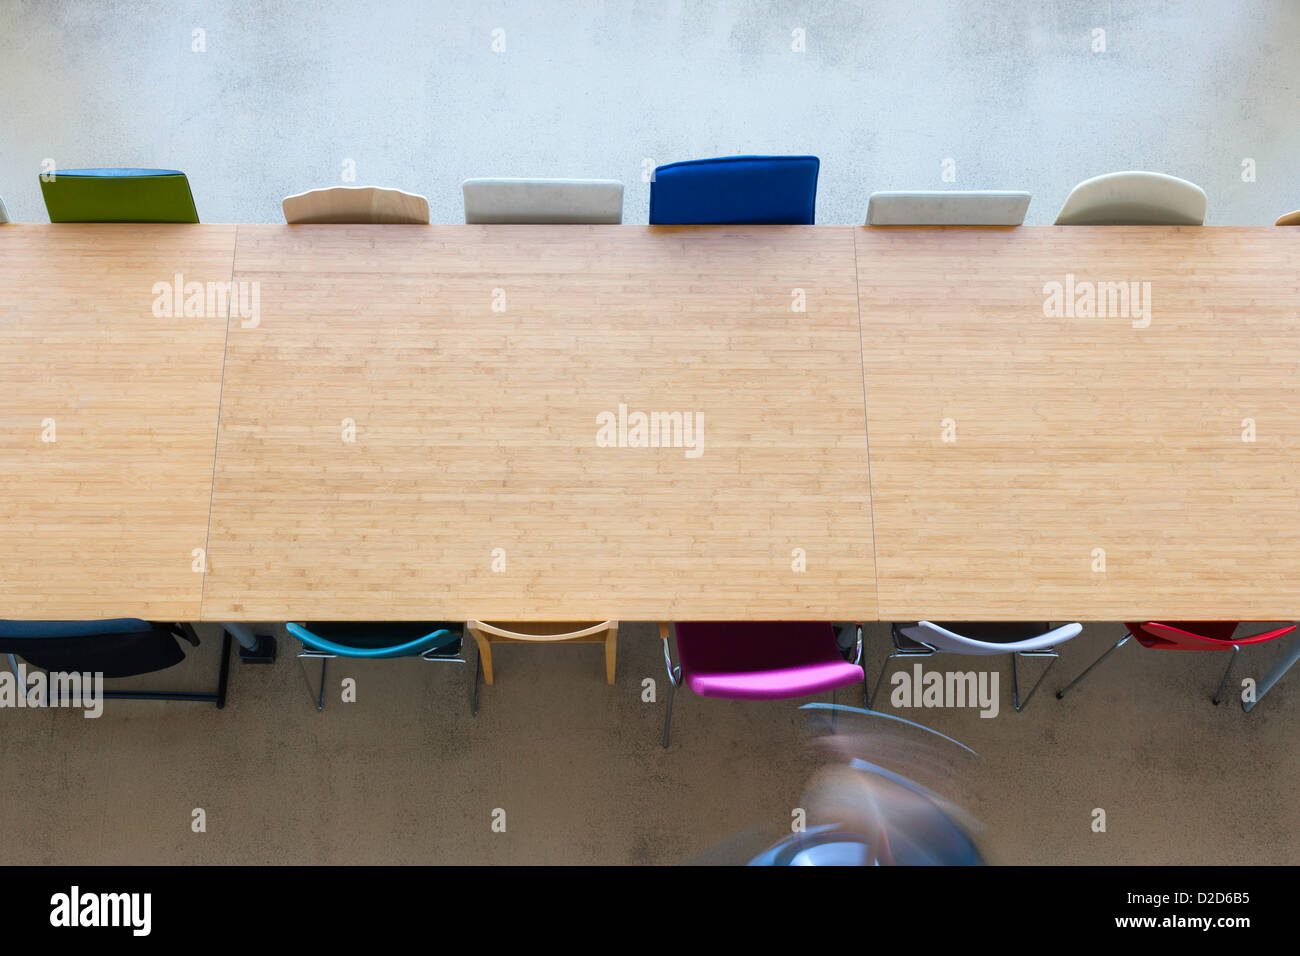 Van Nelle Design Factory, Rotterdam, Netherlands. Architect: Wessel de Jonge architects, 2004. Conference table from up above. Stock Photo